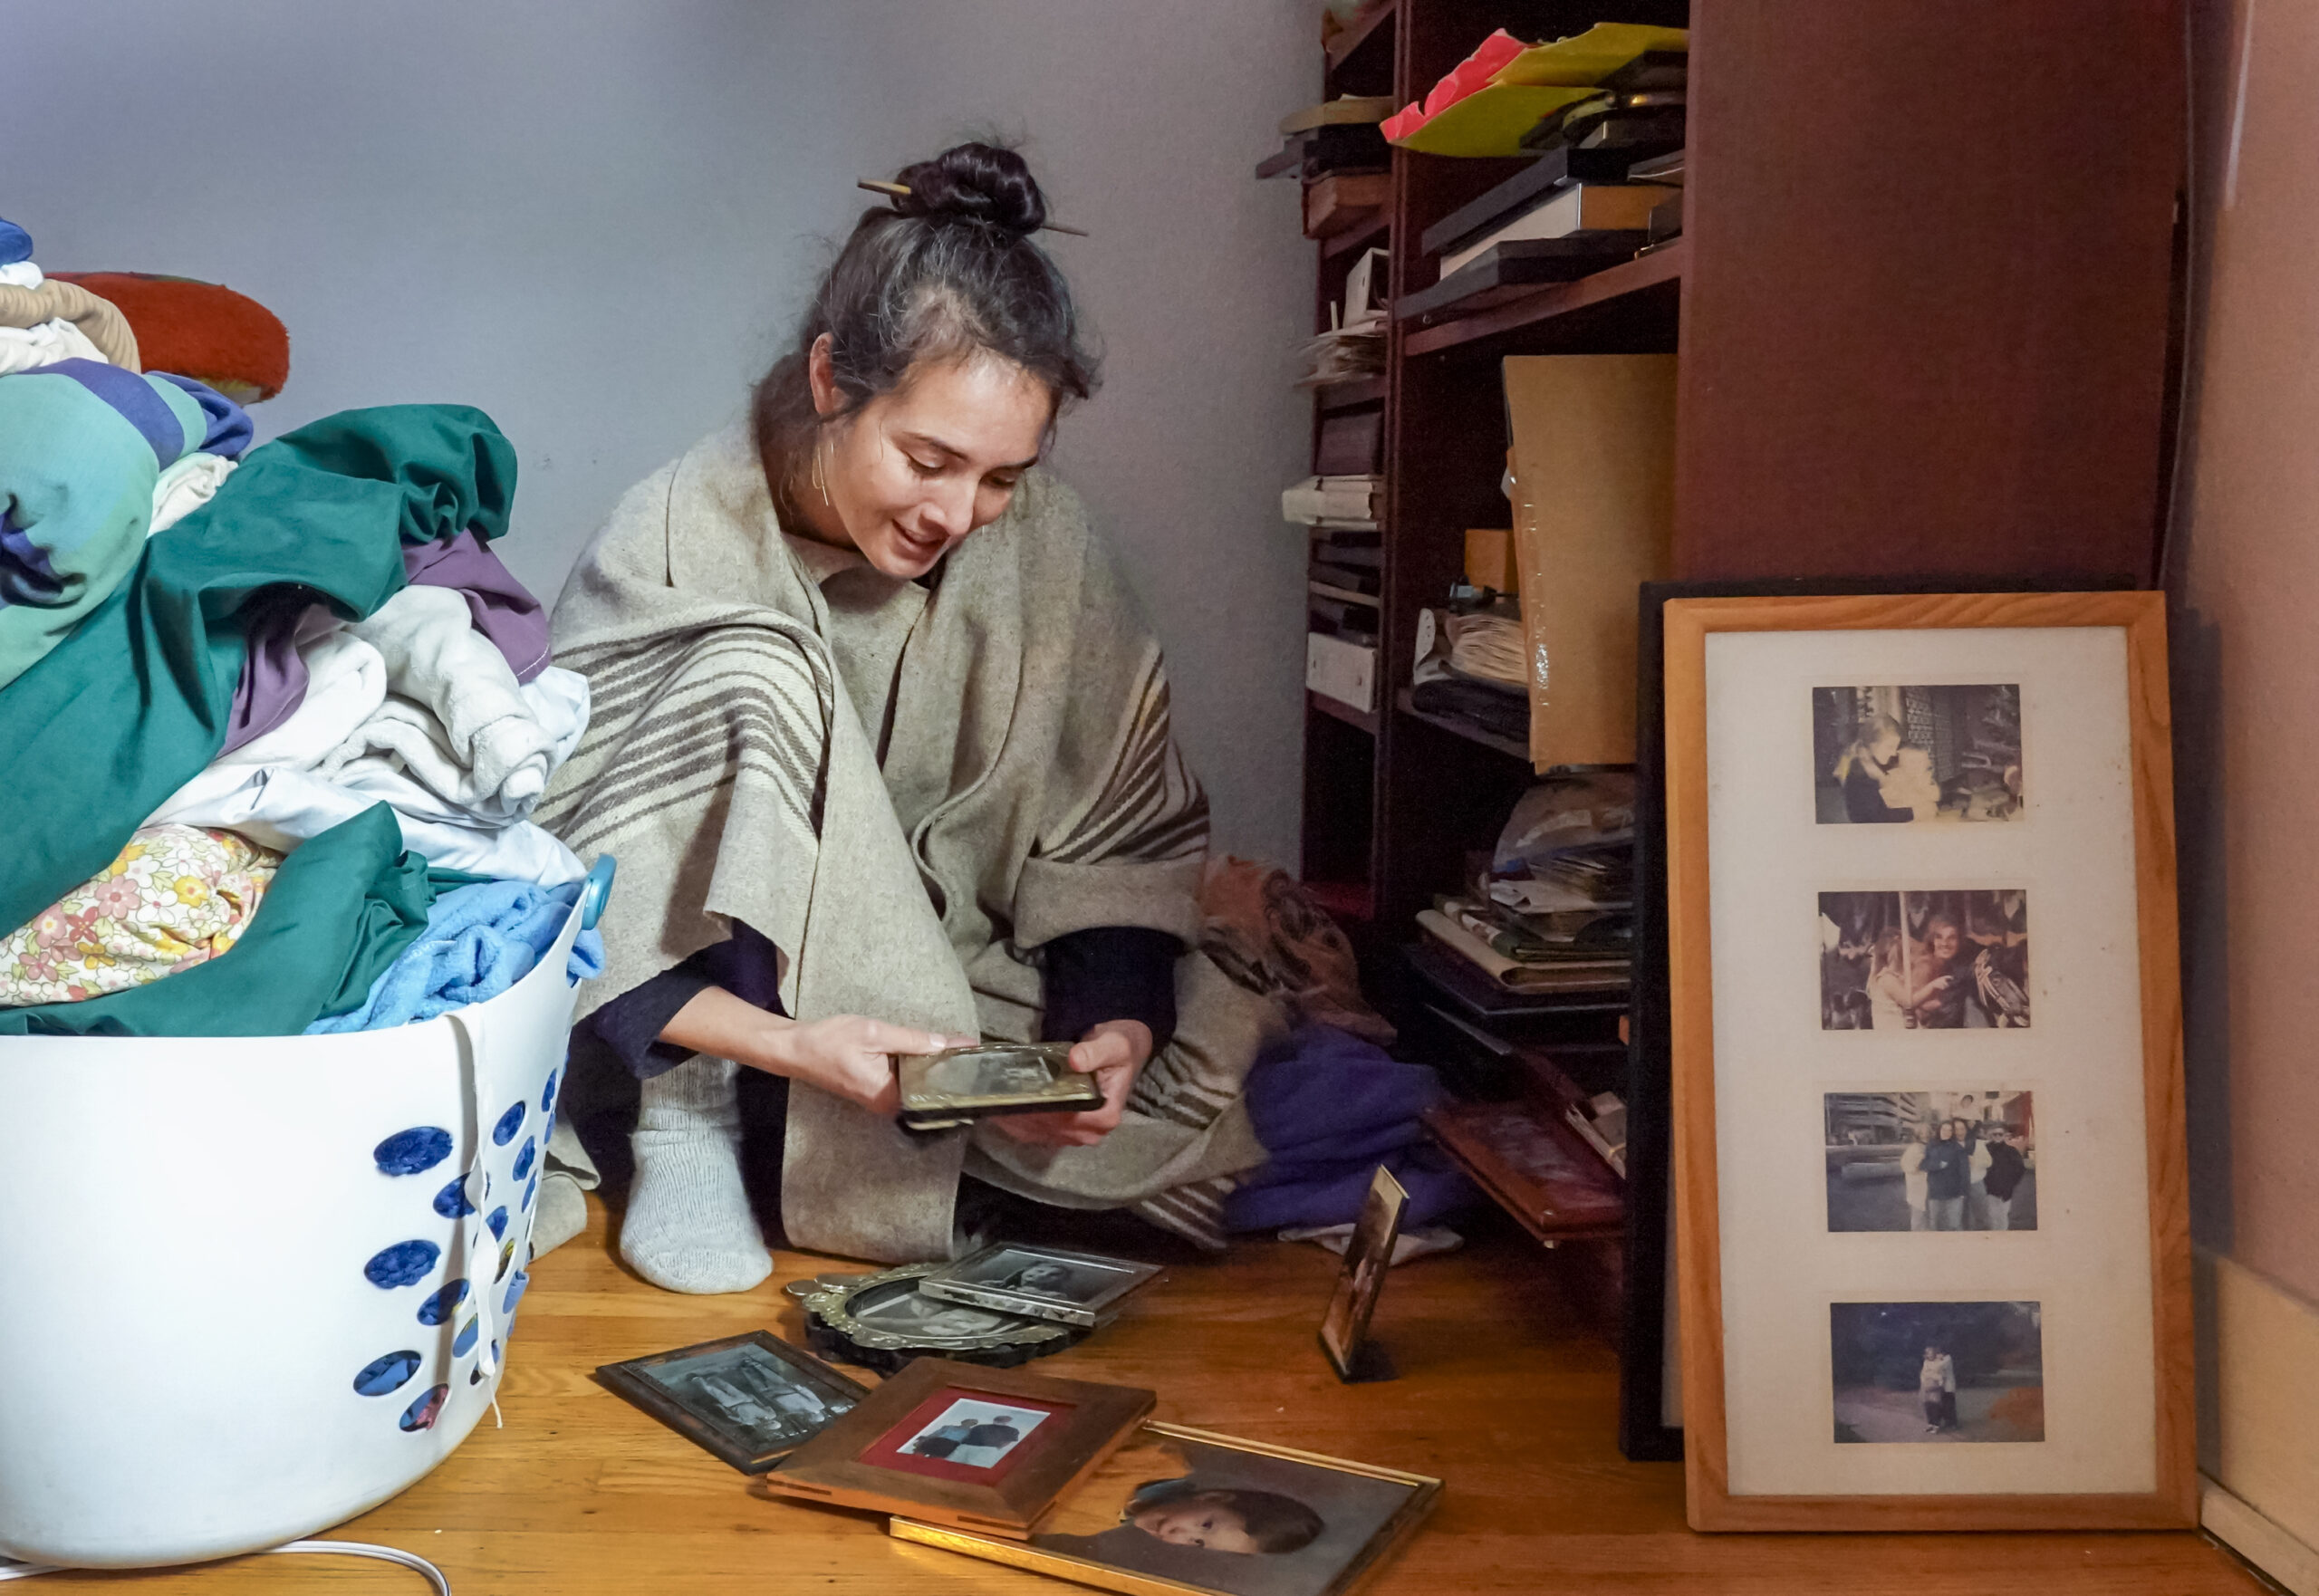 Green sits on a hardwood floor between the foot of a bed and a shelving unit, with a pile of framed photos in front of her.